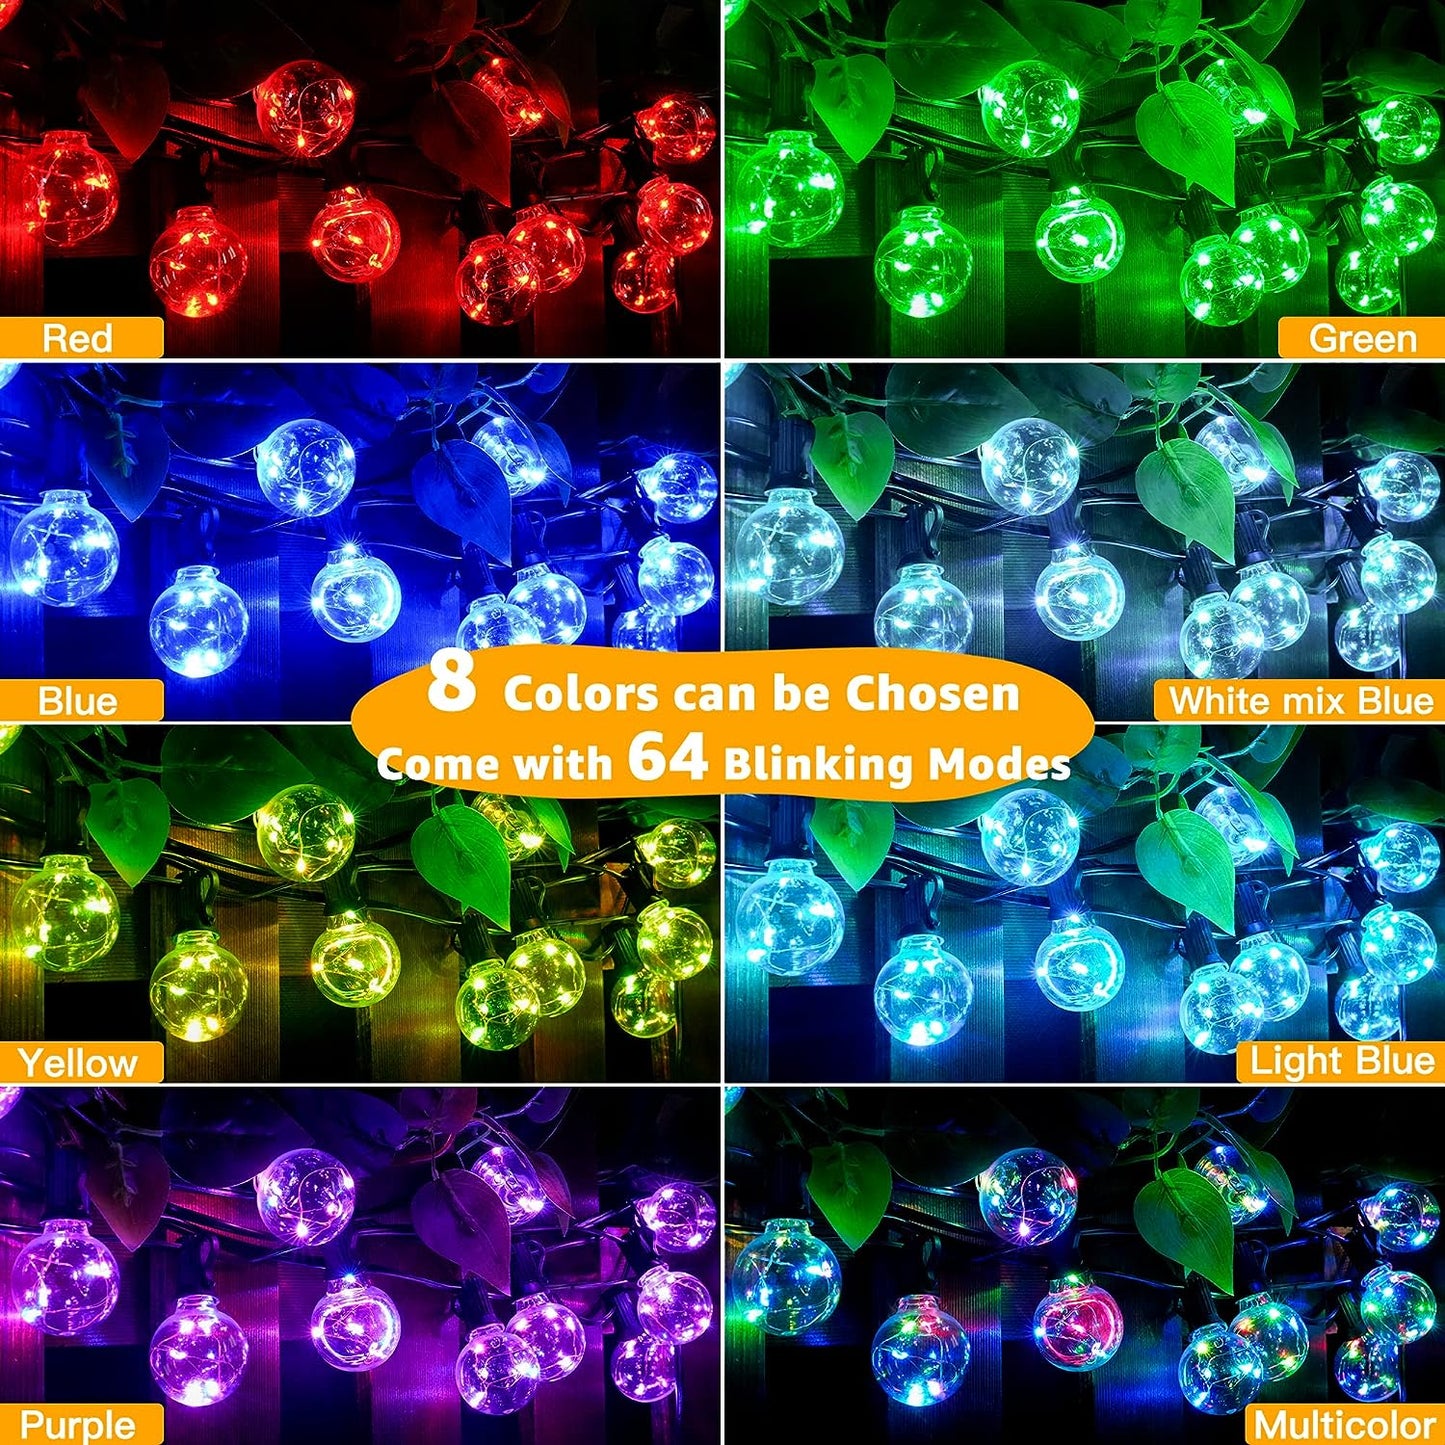 Outdoor String Light with RGBW Color Changing Globe LED Bulbs Shatterproof for Patio Garden Yard